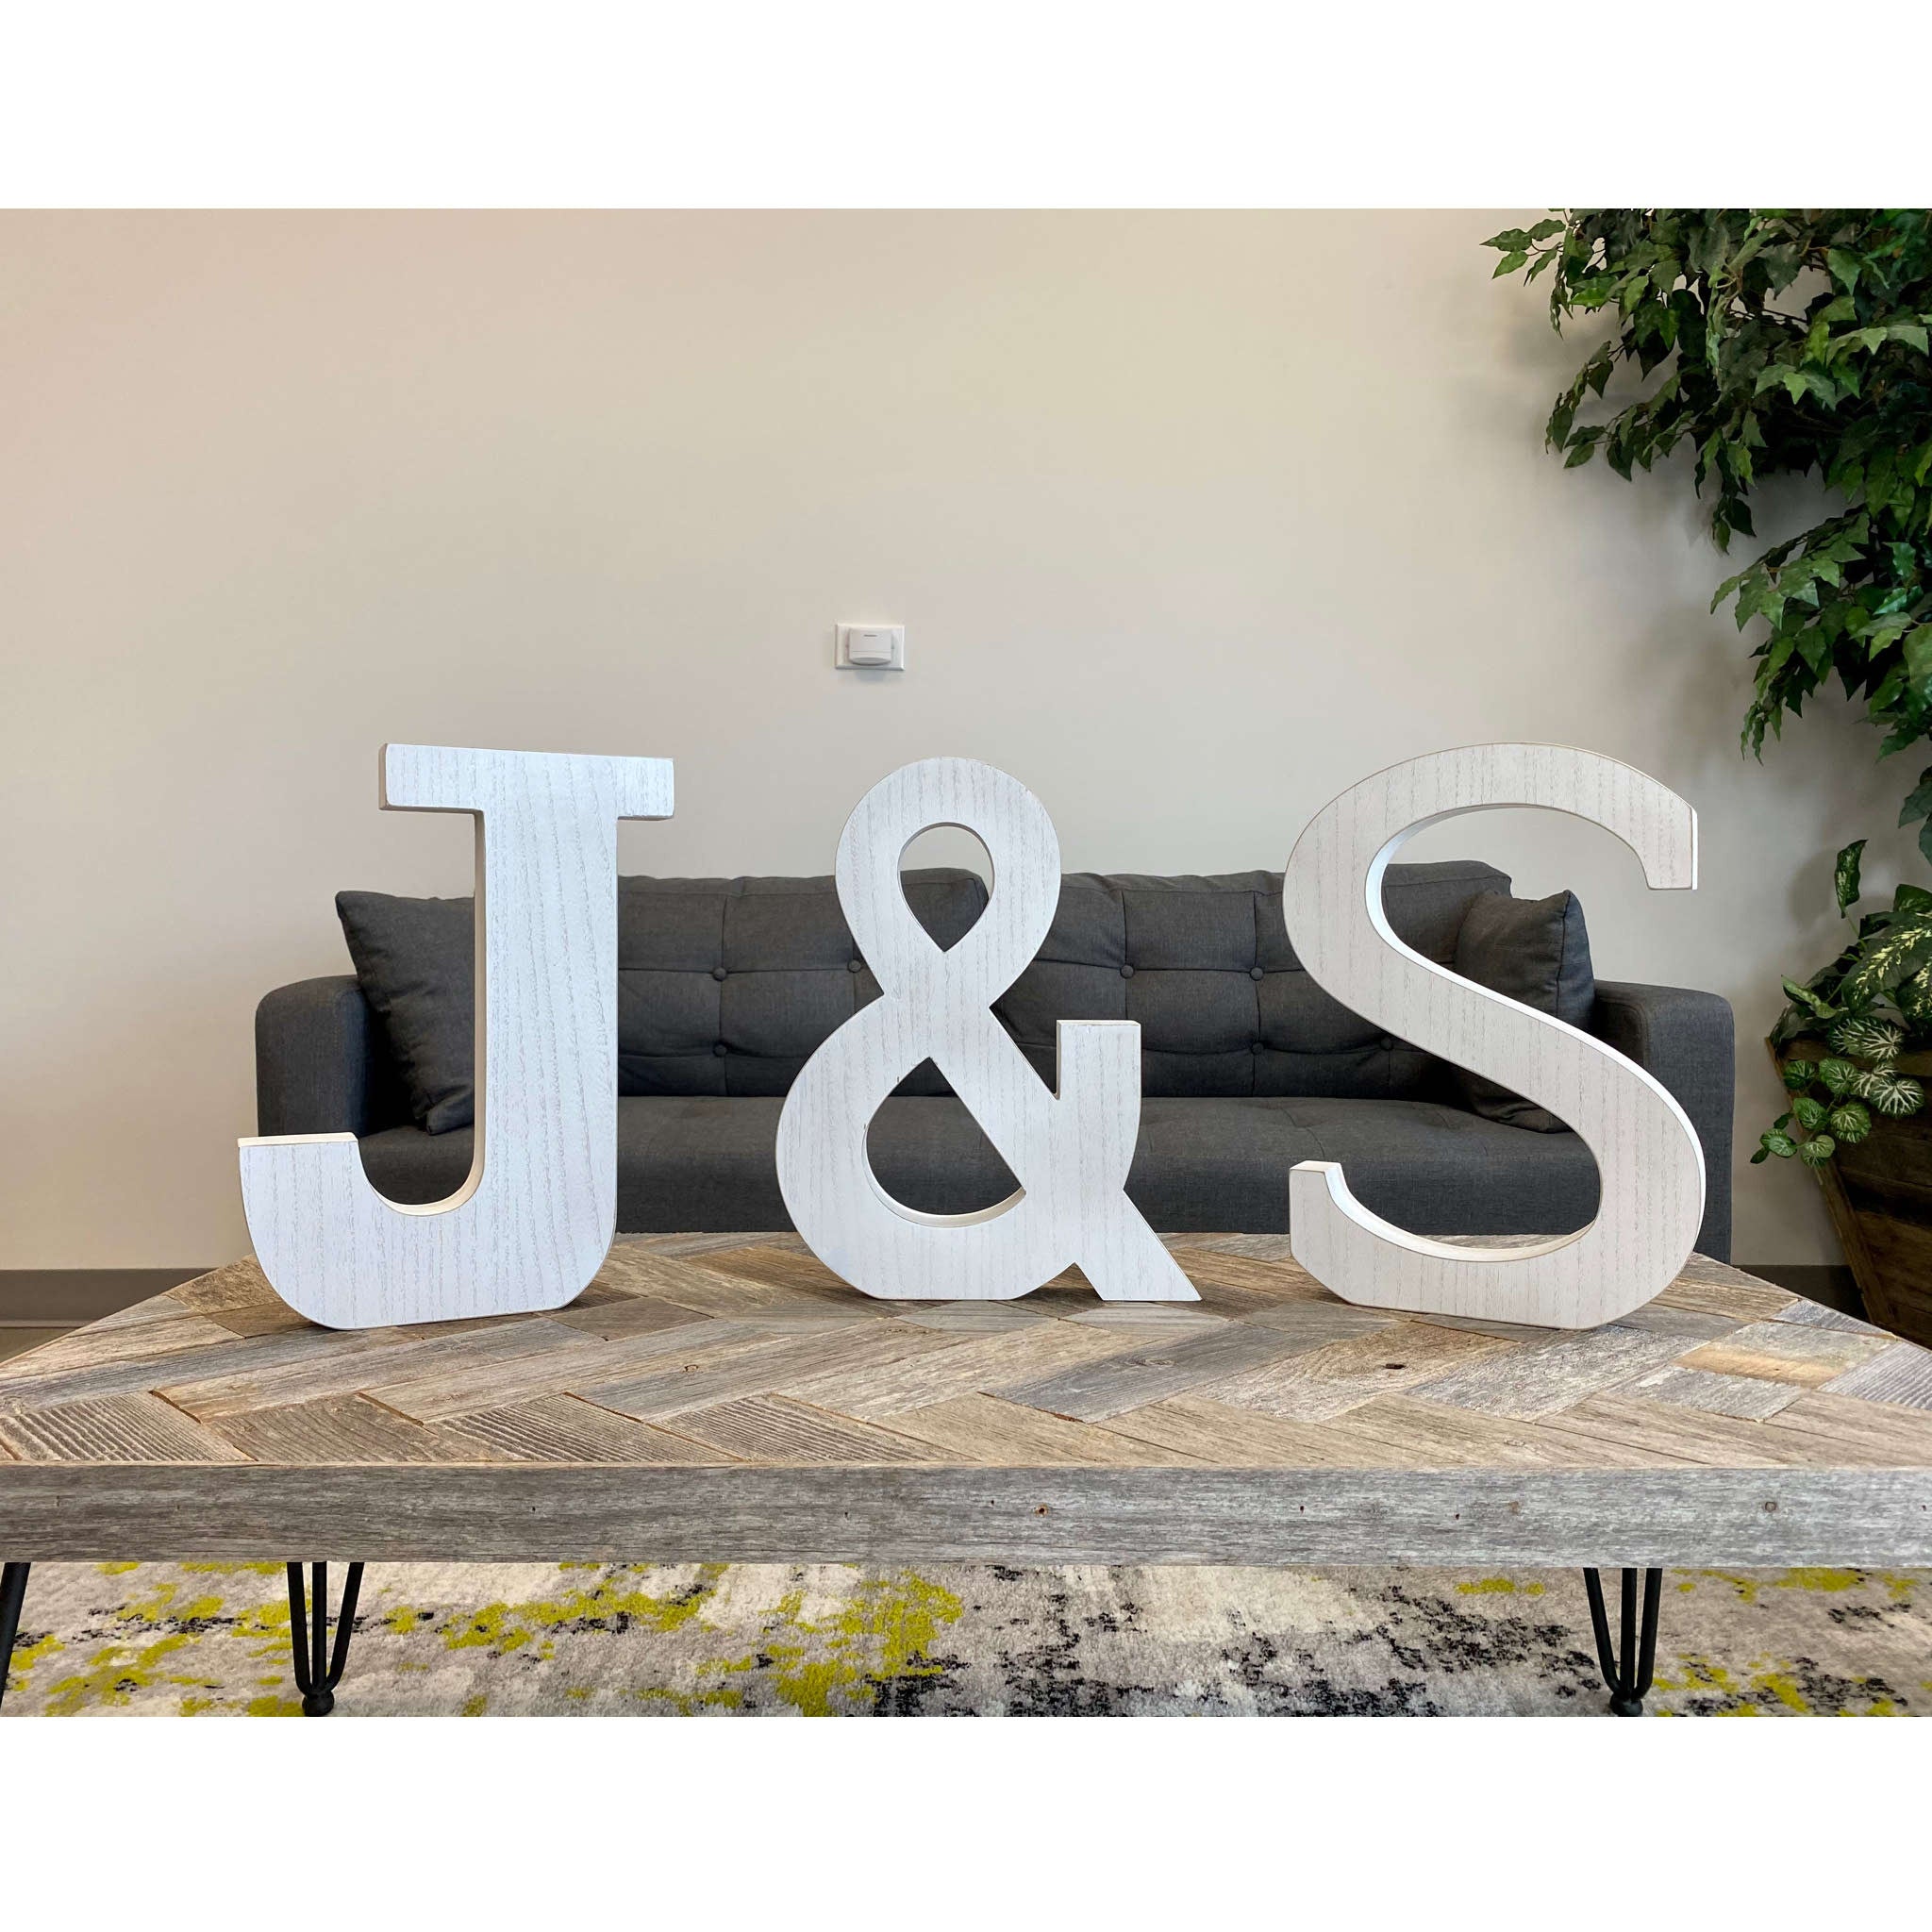 16" Distressed White Wash Wooden Initial Letter F Sculpture